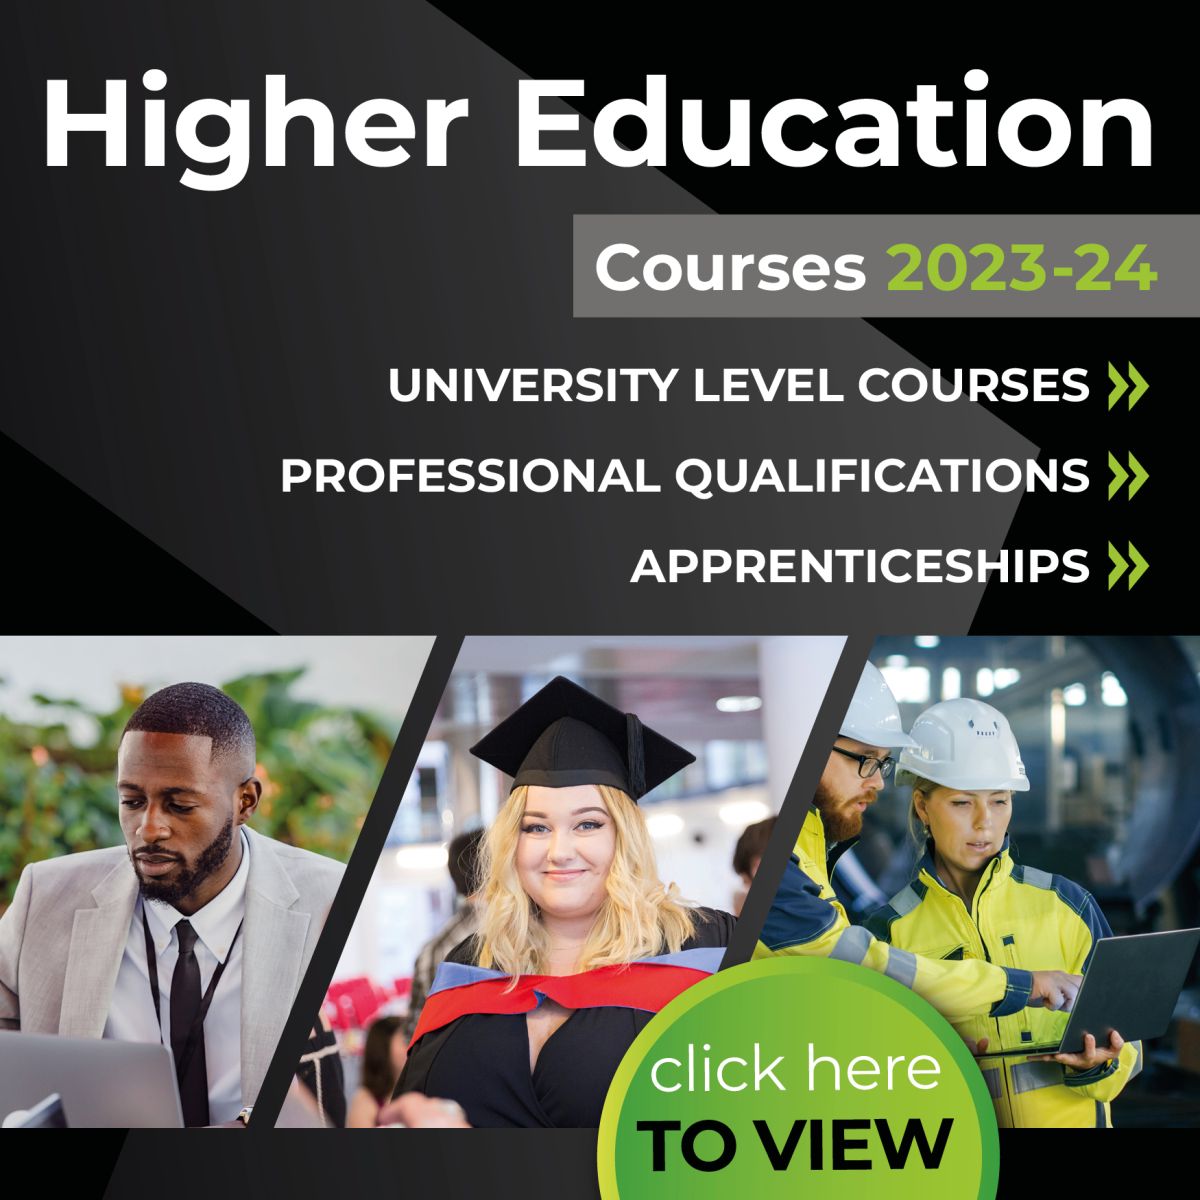 Higher education courses - click to view